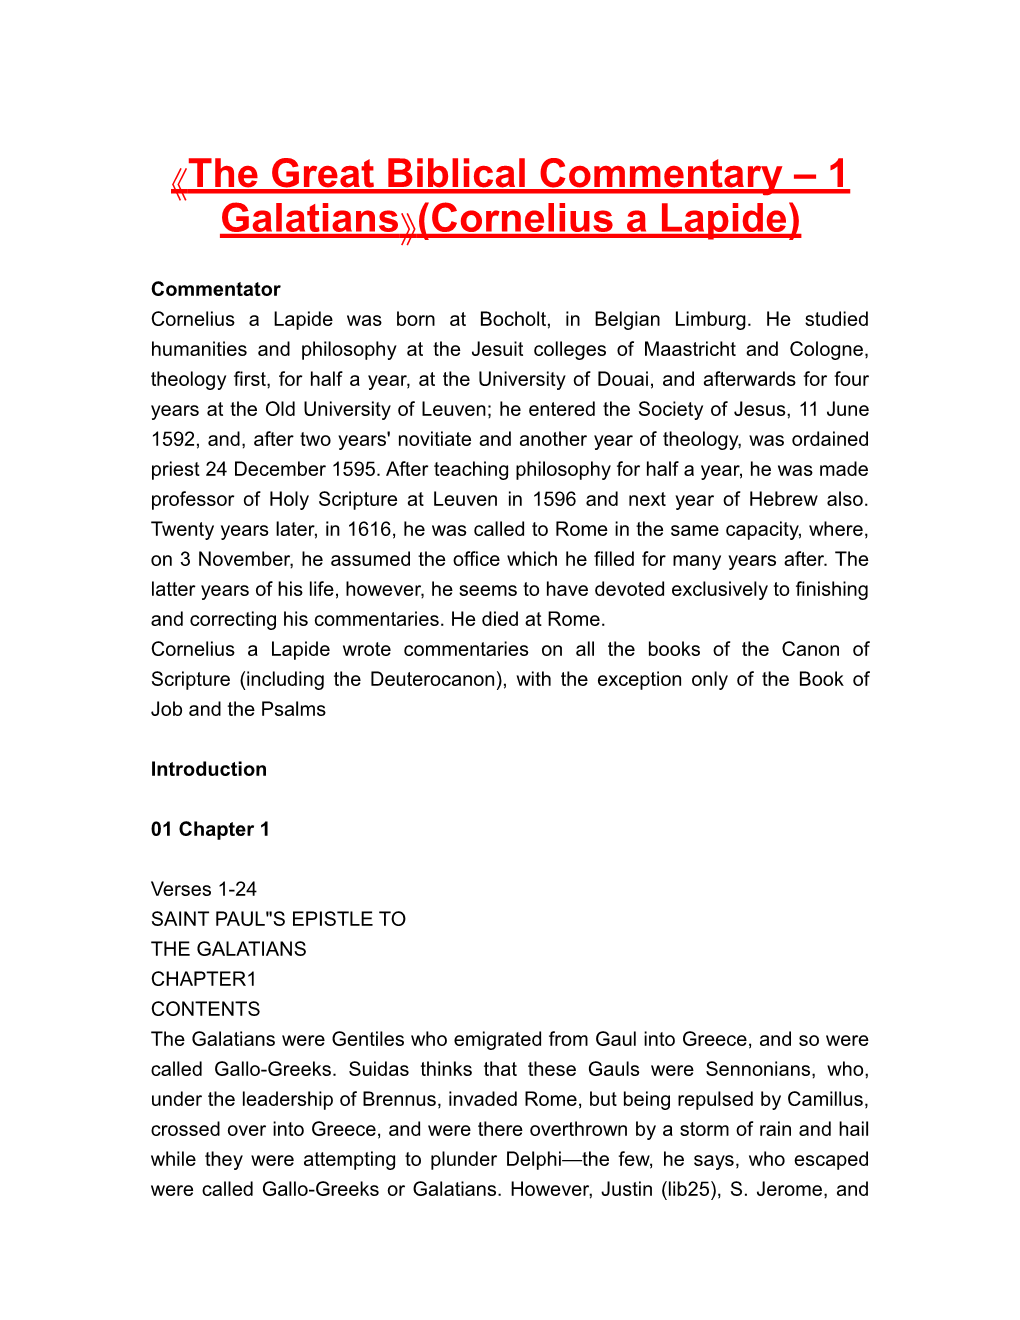 The Great Biblical Commentary 1 Galatians (Cornelius a Lapide)